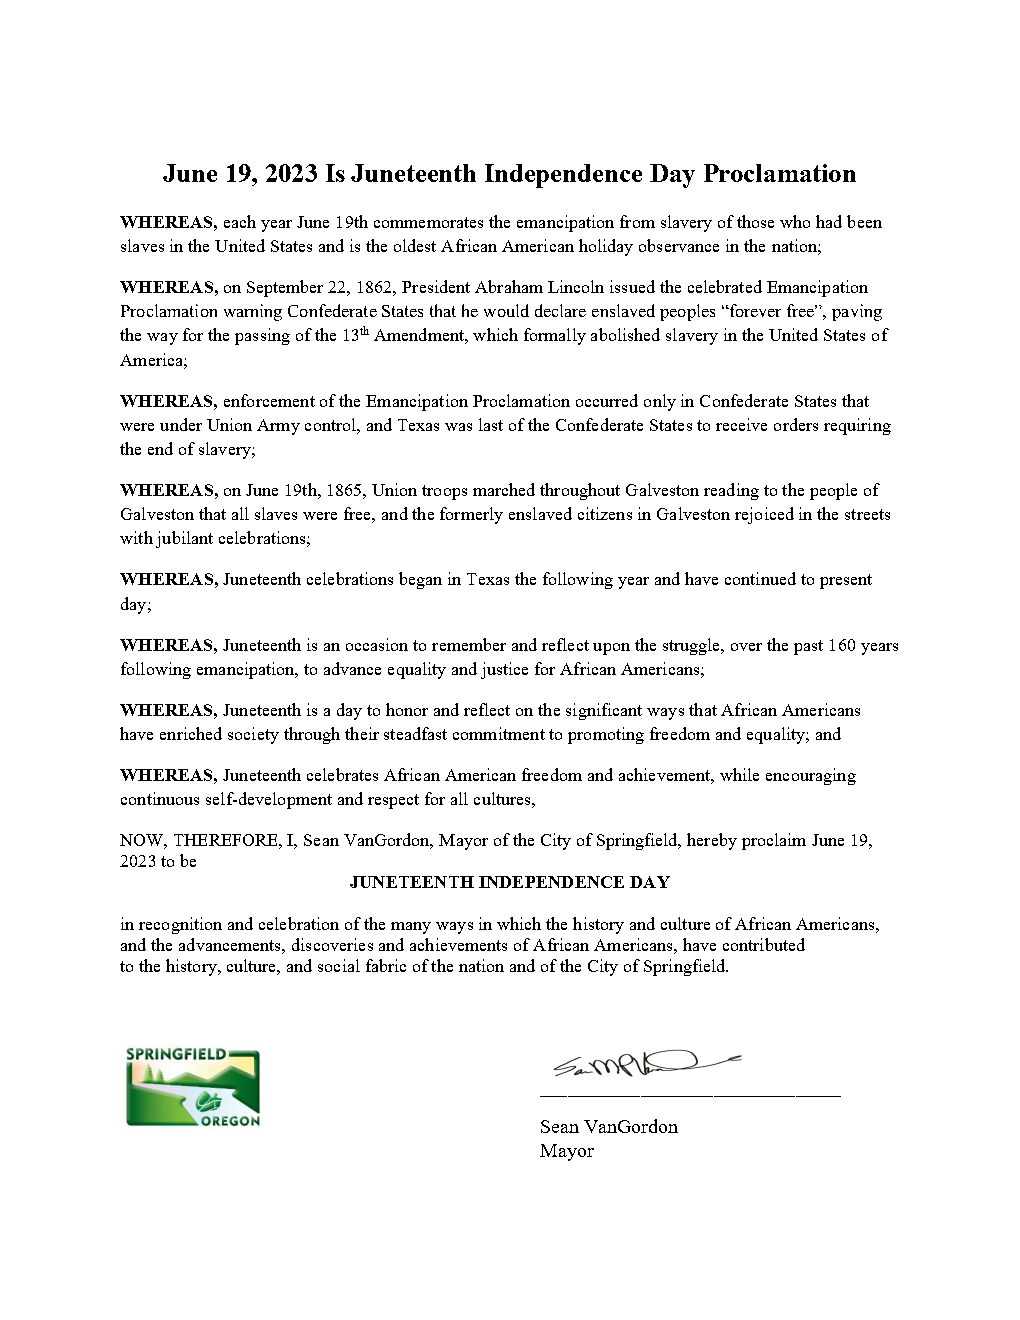 This is an image of a signed proclamation declaring June 19, 2023 as Juneteenth Independence Day